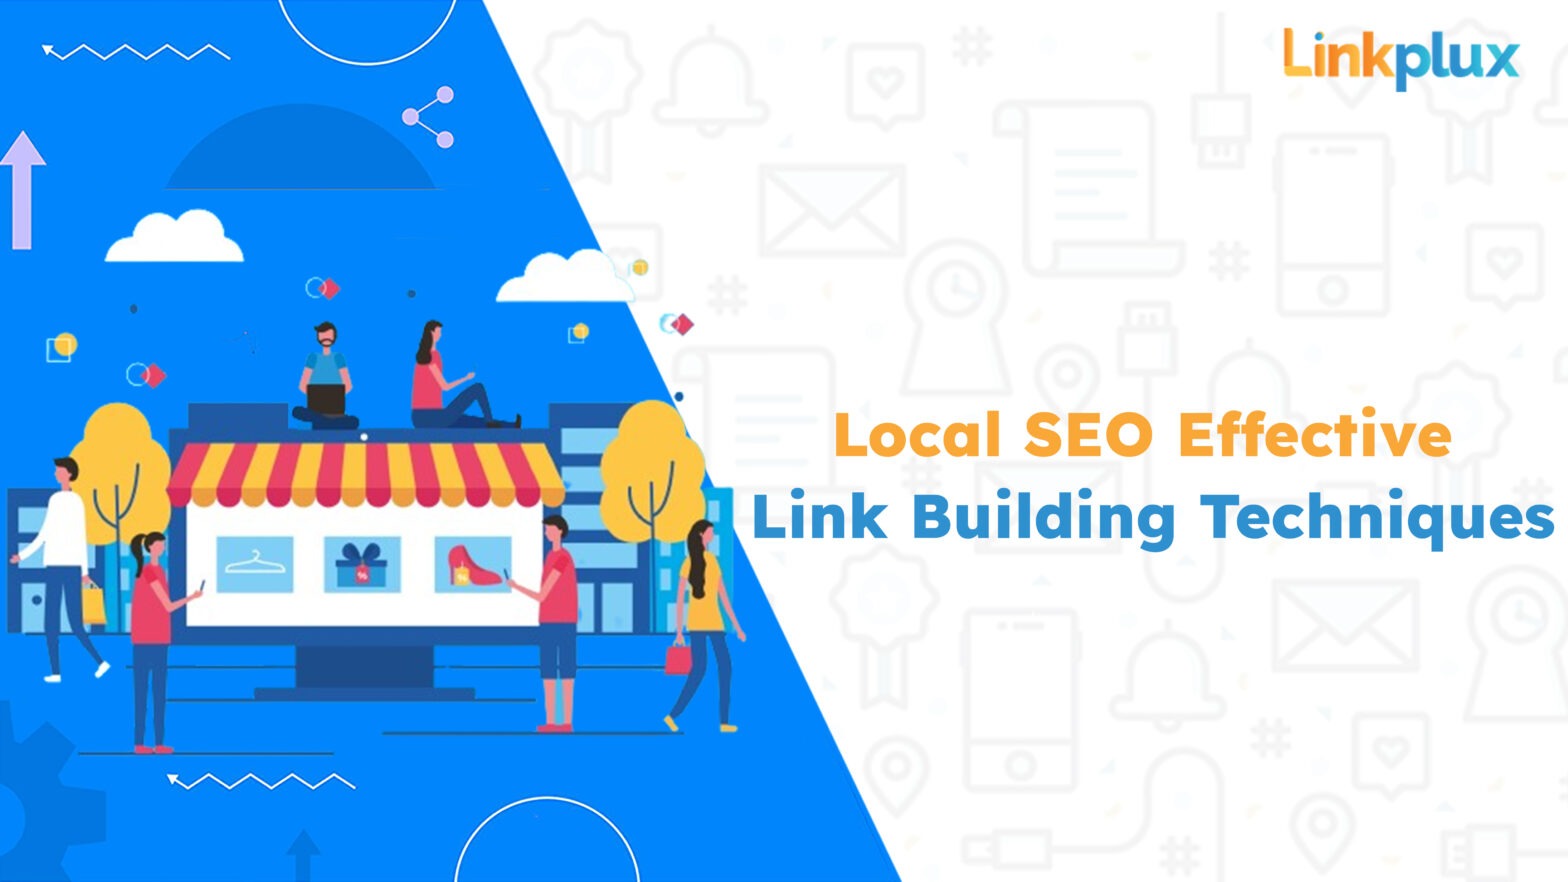 Local SEO Effective Link Building